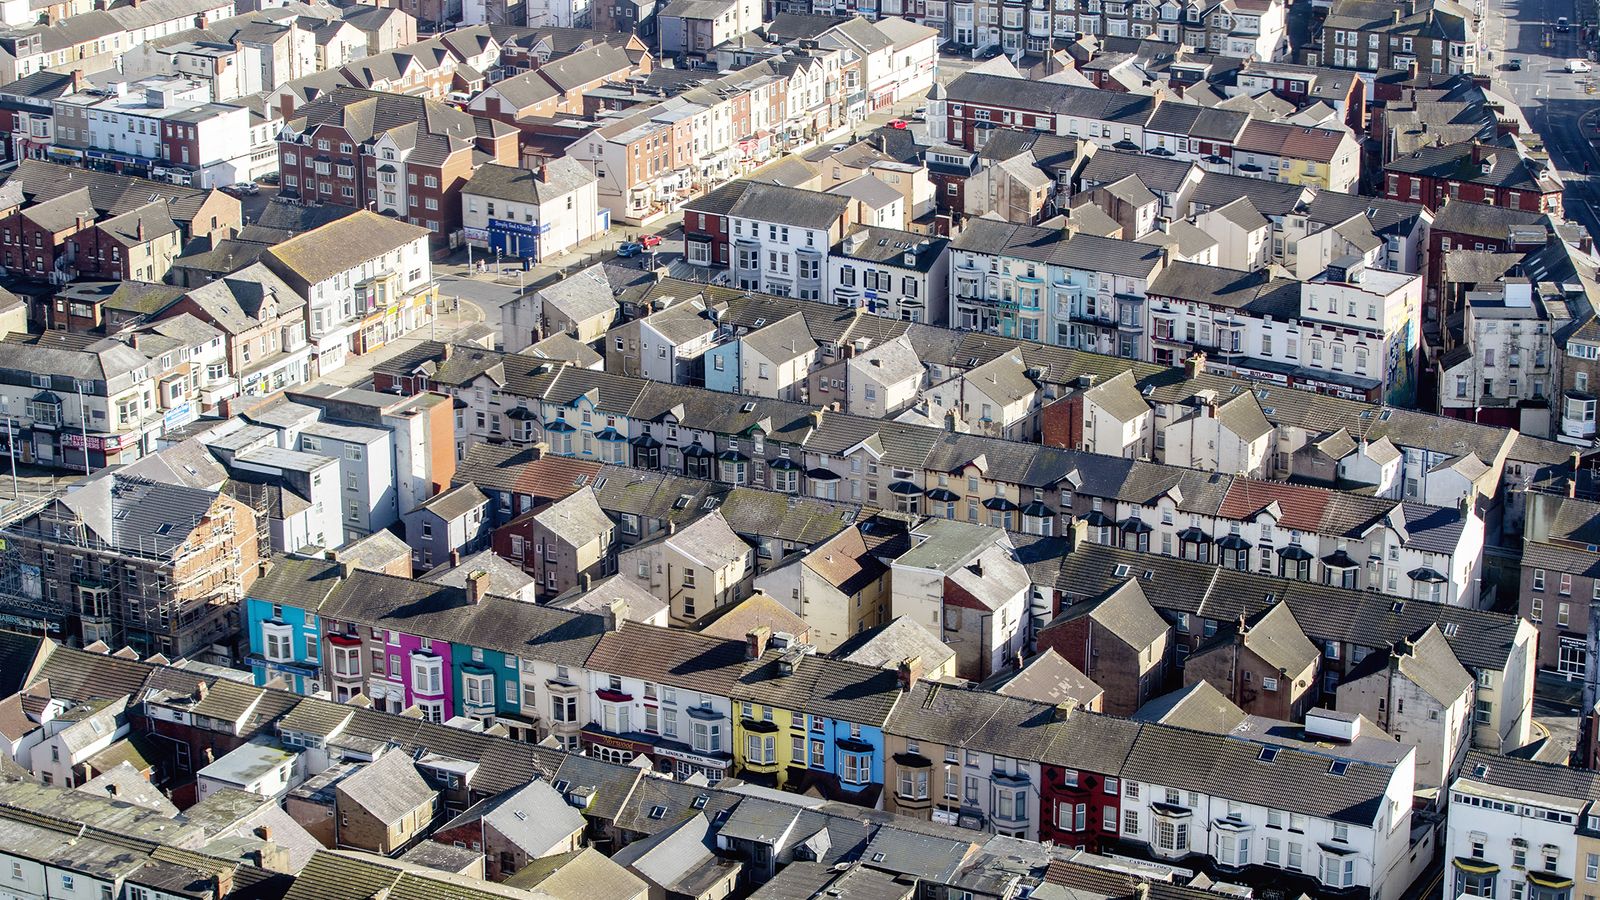 Mortgage Market in Crisis as Rates Tick Up Amidst Interest Rate Fears